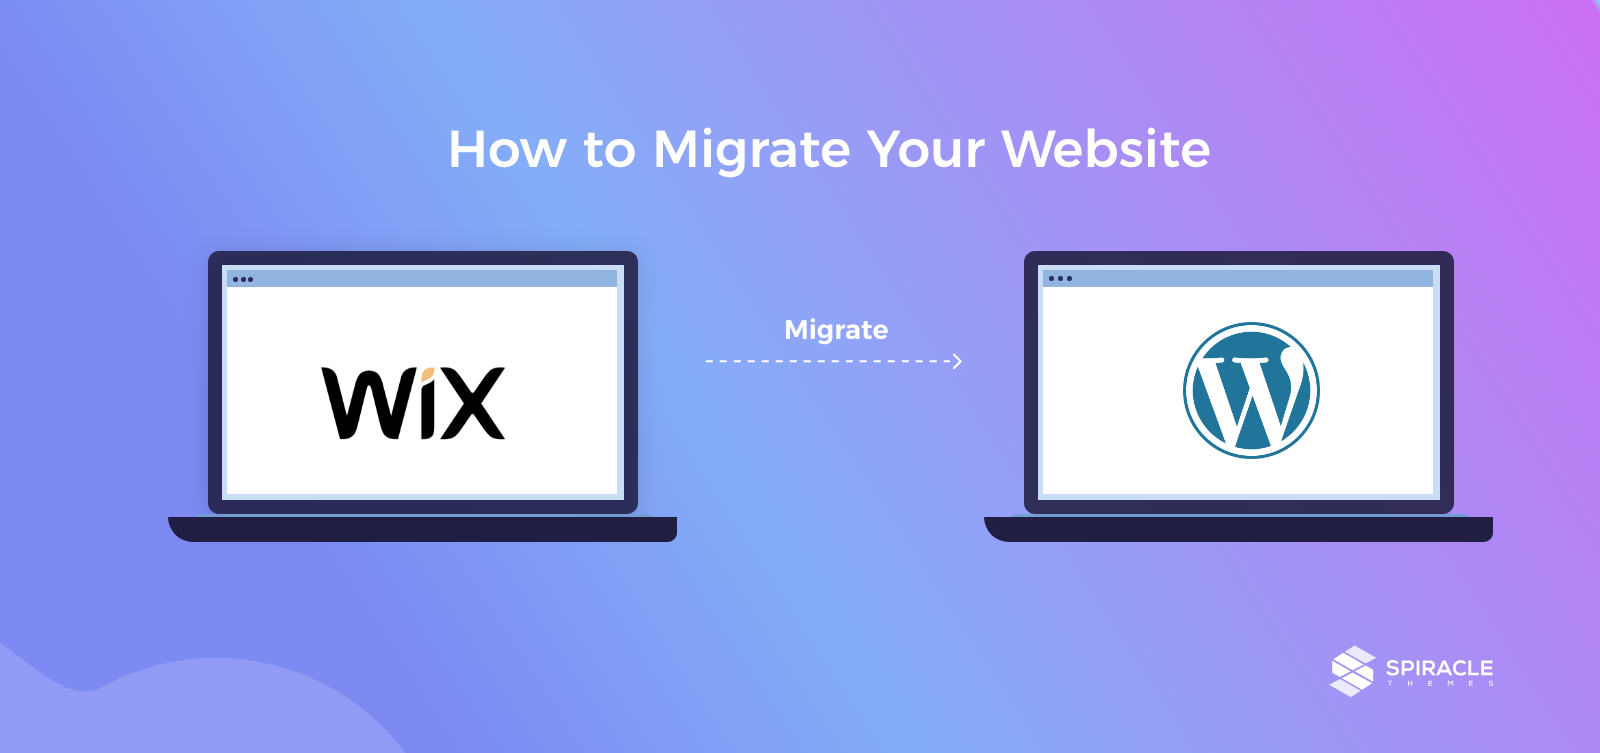 How to Migrate Your Website from Wix to WordPress